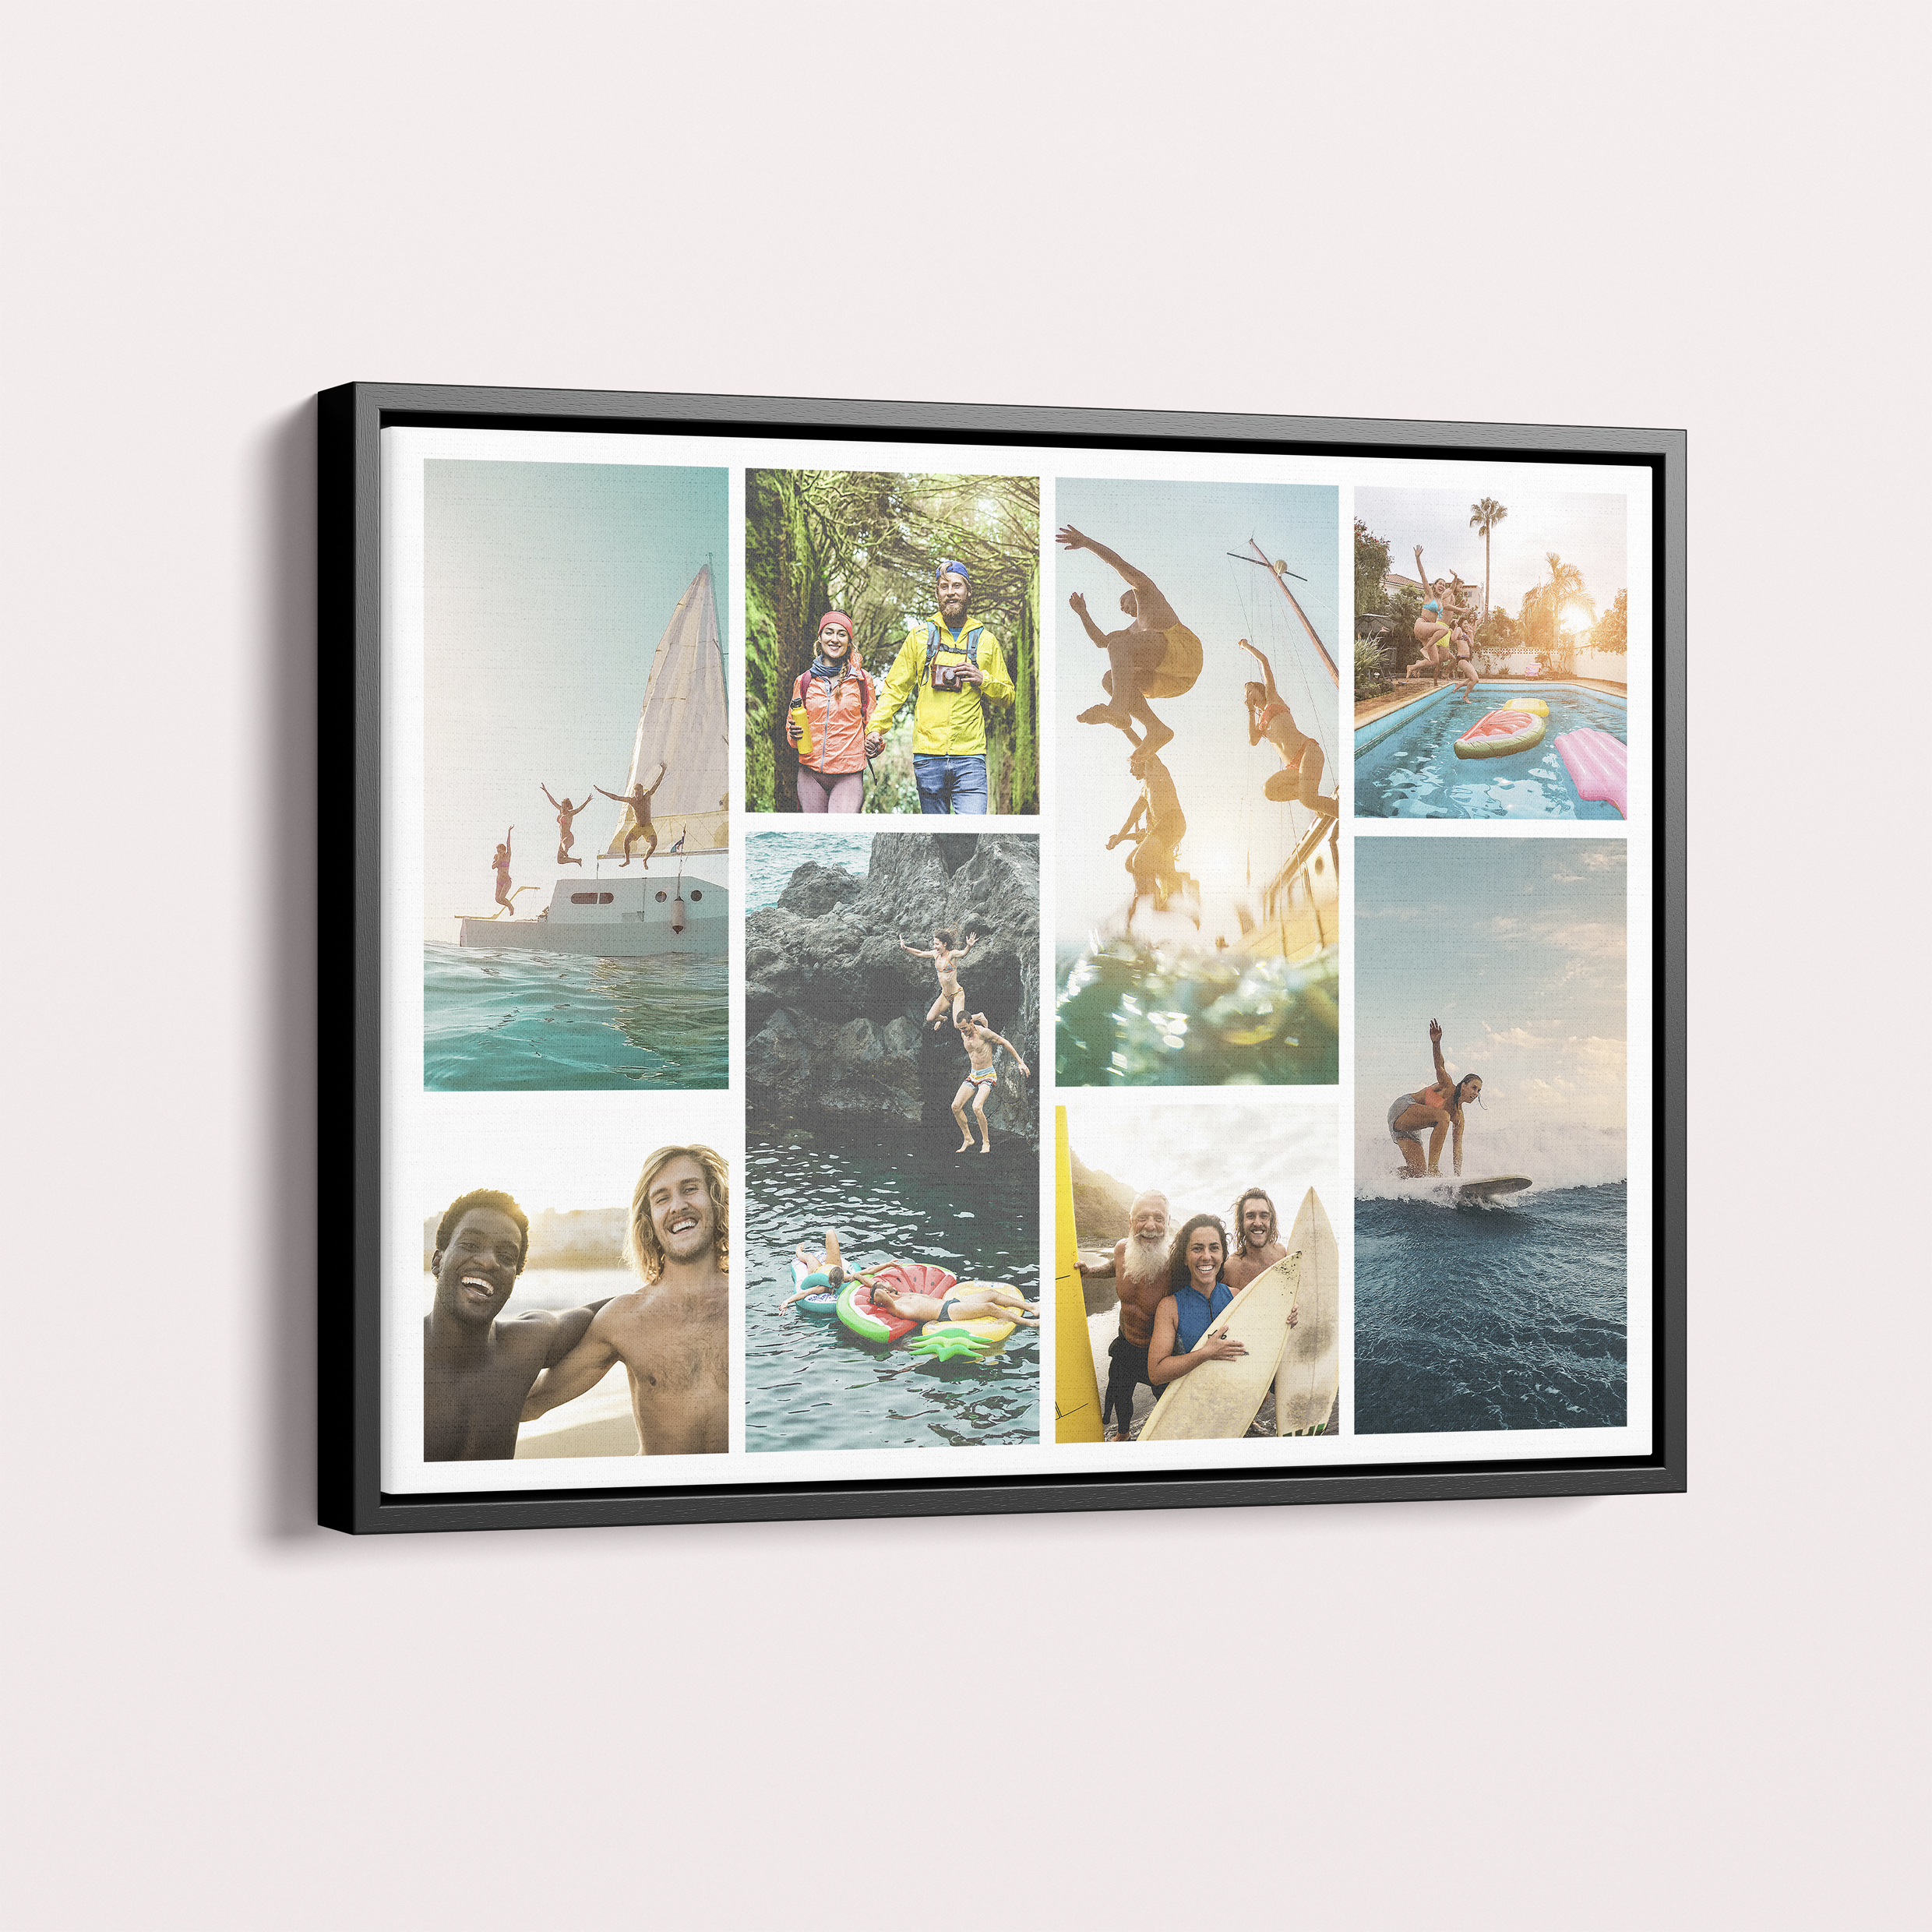  Personalized Shutter Montage Framed Photo Canvas - Immerse yourself in a world of memories with this landscape-oriented canvas accommodating 8 photos.